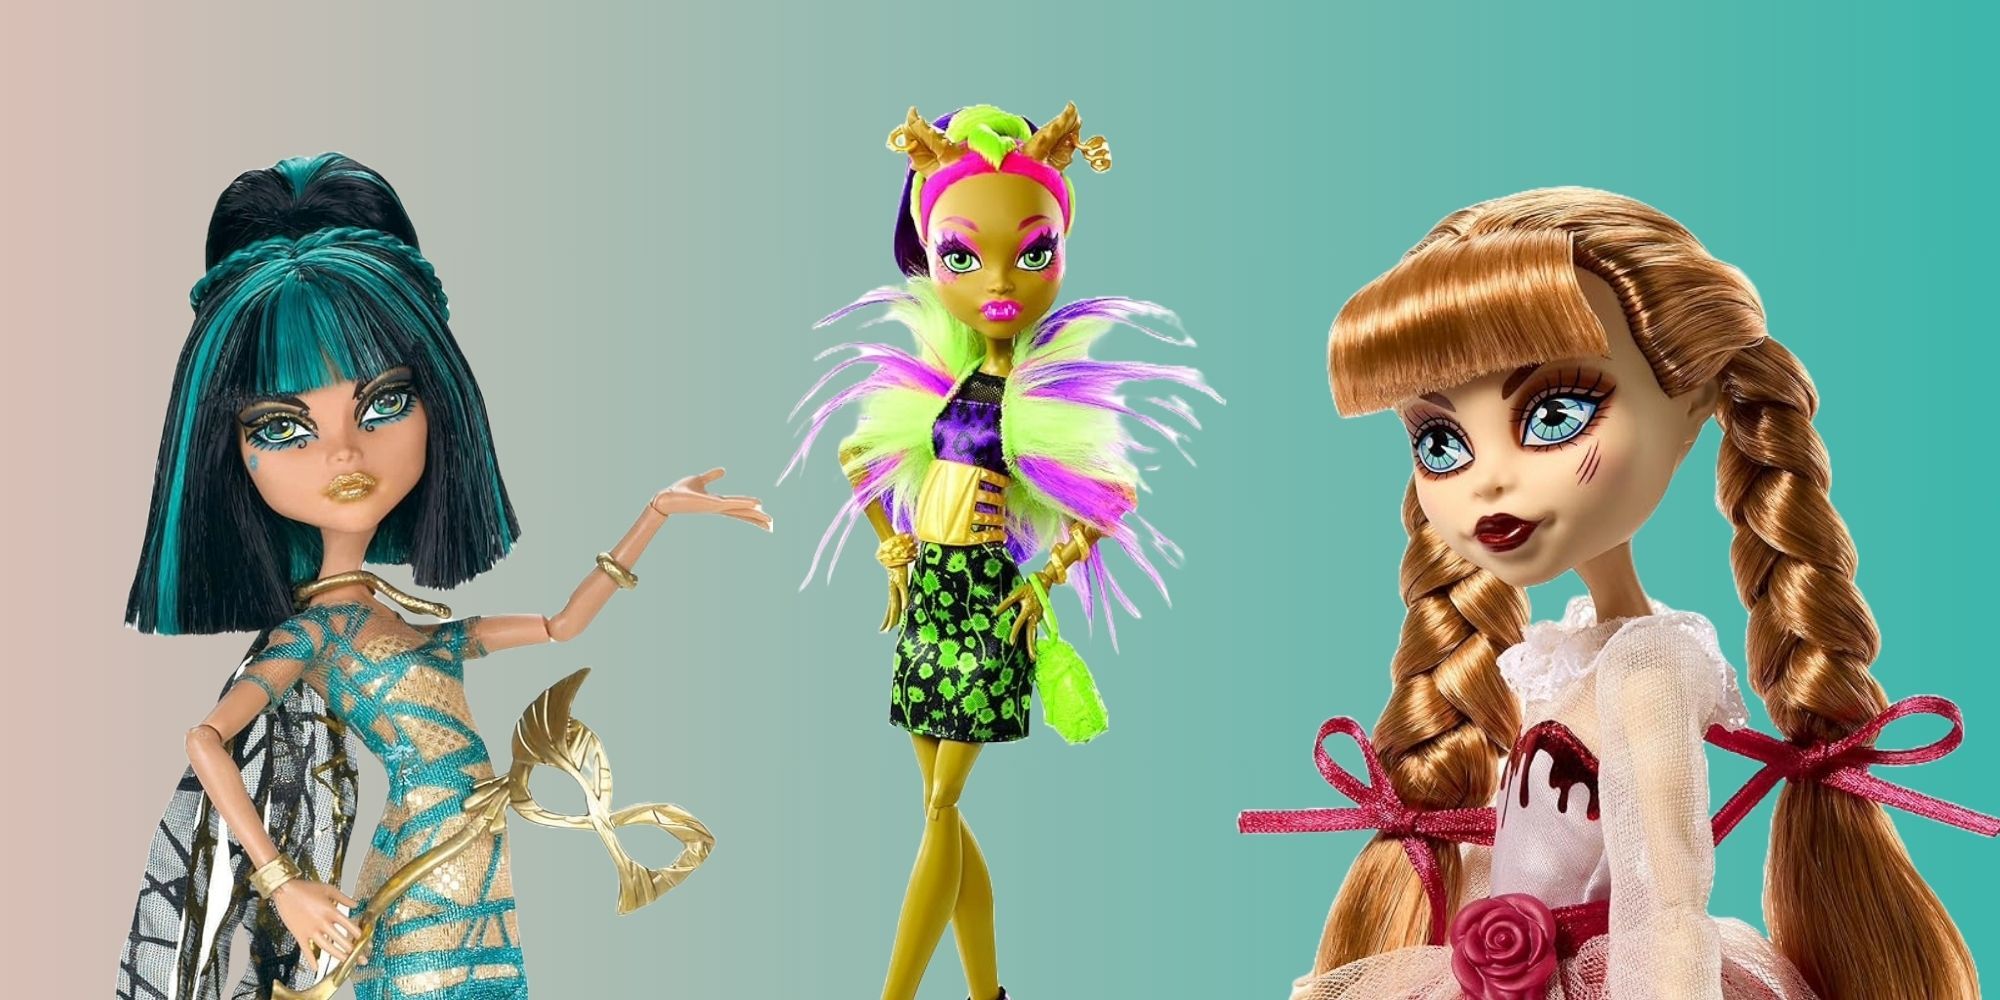 Three monster high dolls against a teal and cream gradient background.